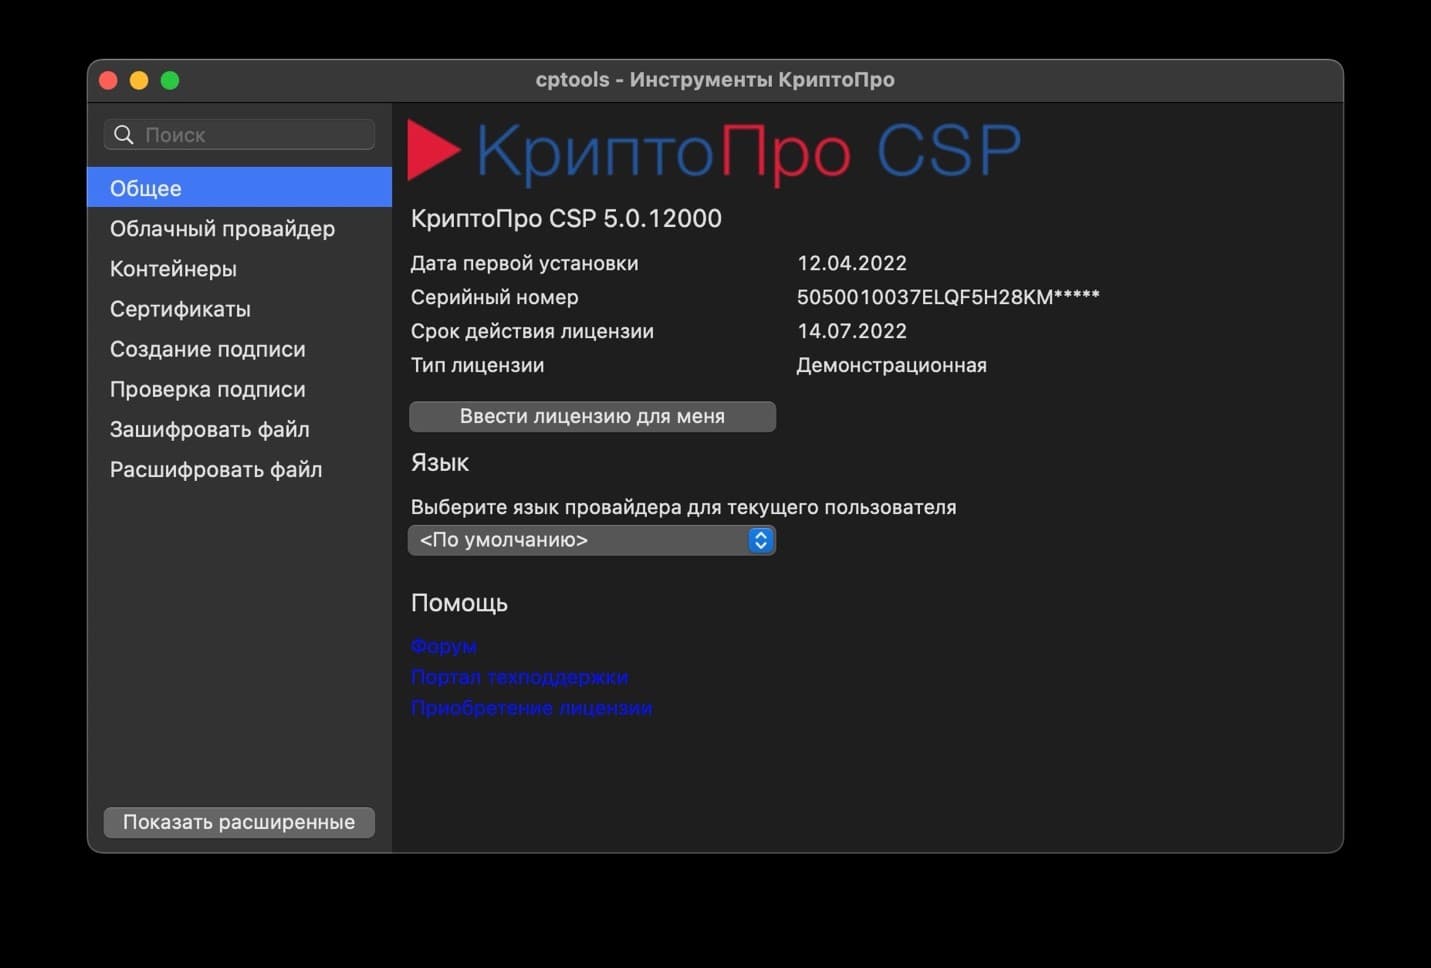 CryptoPro ECP browser plug-in requires rdr_gui_gtk package from CryptoPro CSP